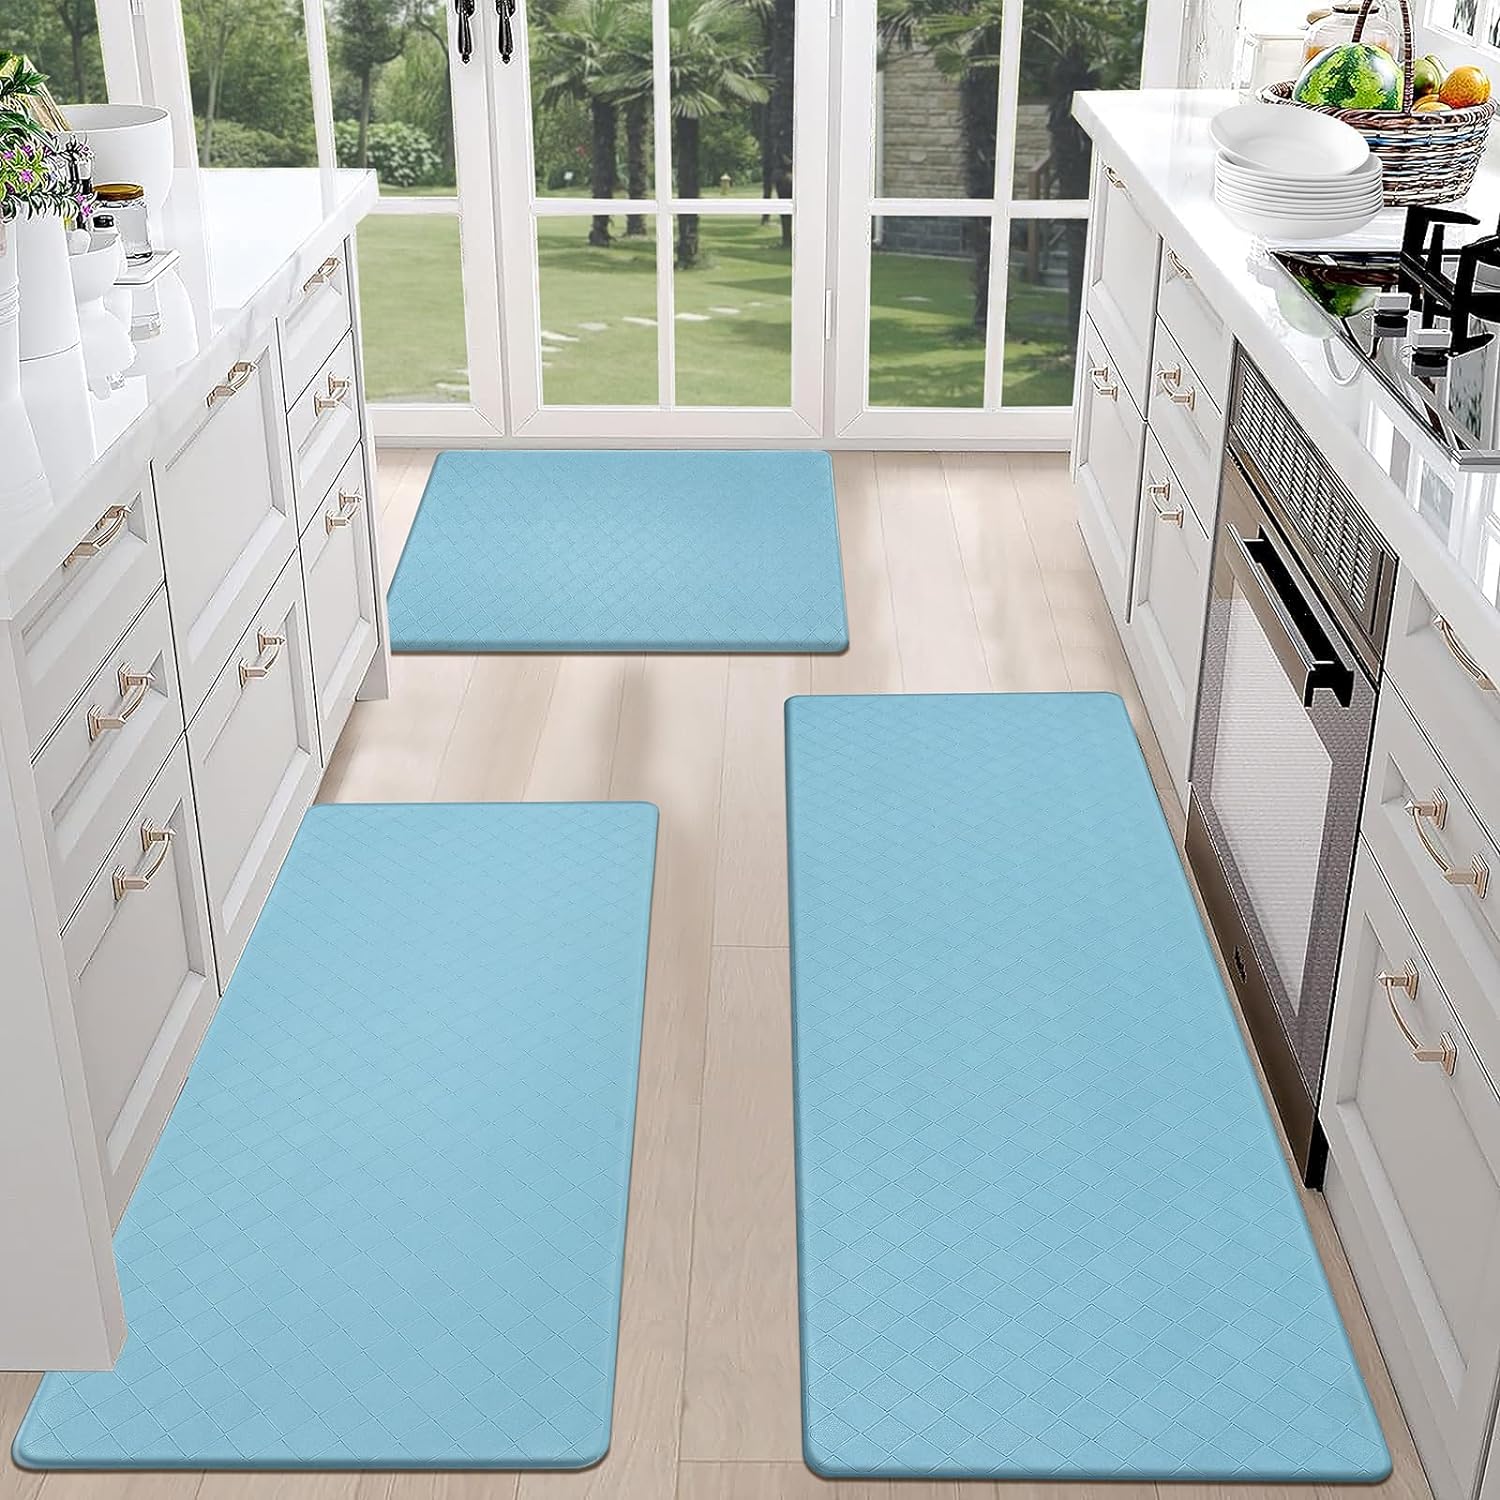 HEBE Anti Fatigue Kitchen Rug Sets 3 Piece Cushioned Kitchen Mats for Floor Non Slip Kitchen Rugs and Mats Waterproof Comfort Standing Mat Runner for Kitchen,Home Office,Sink,Laundry